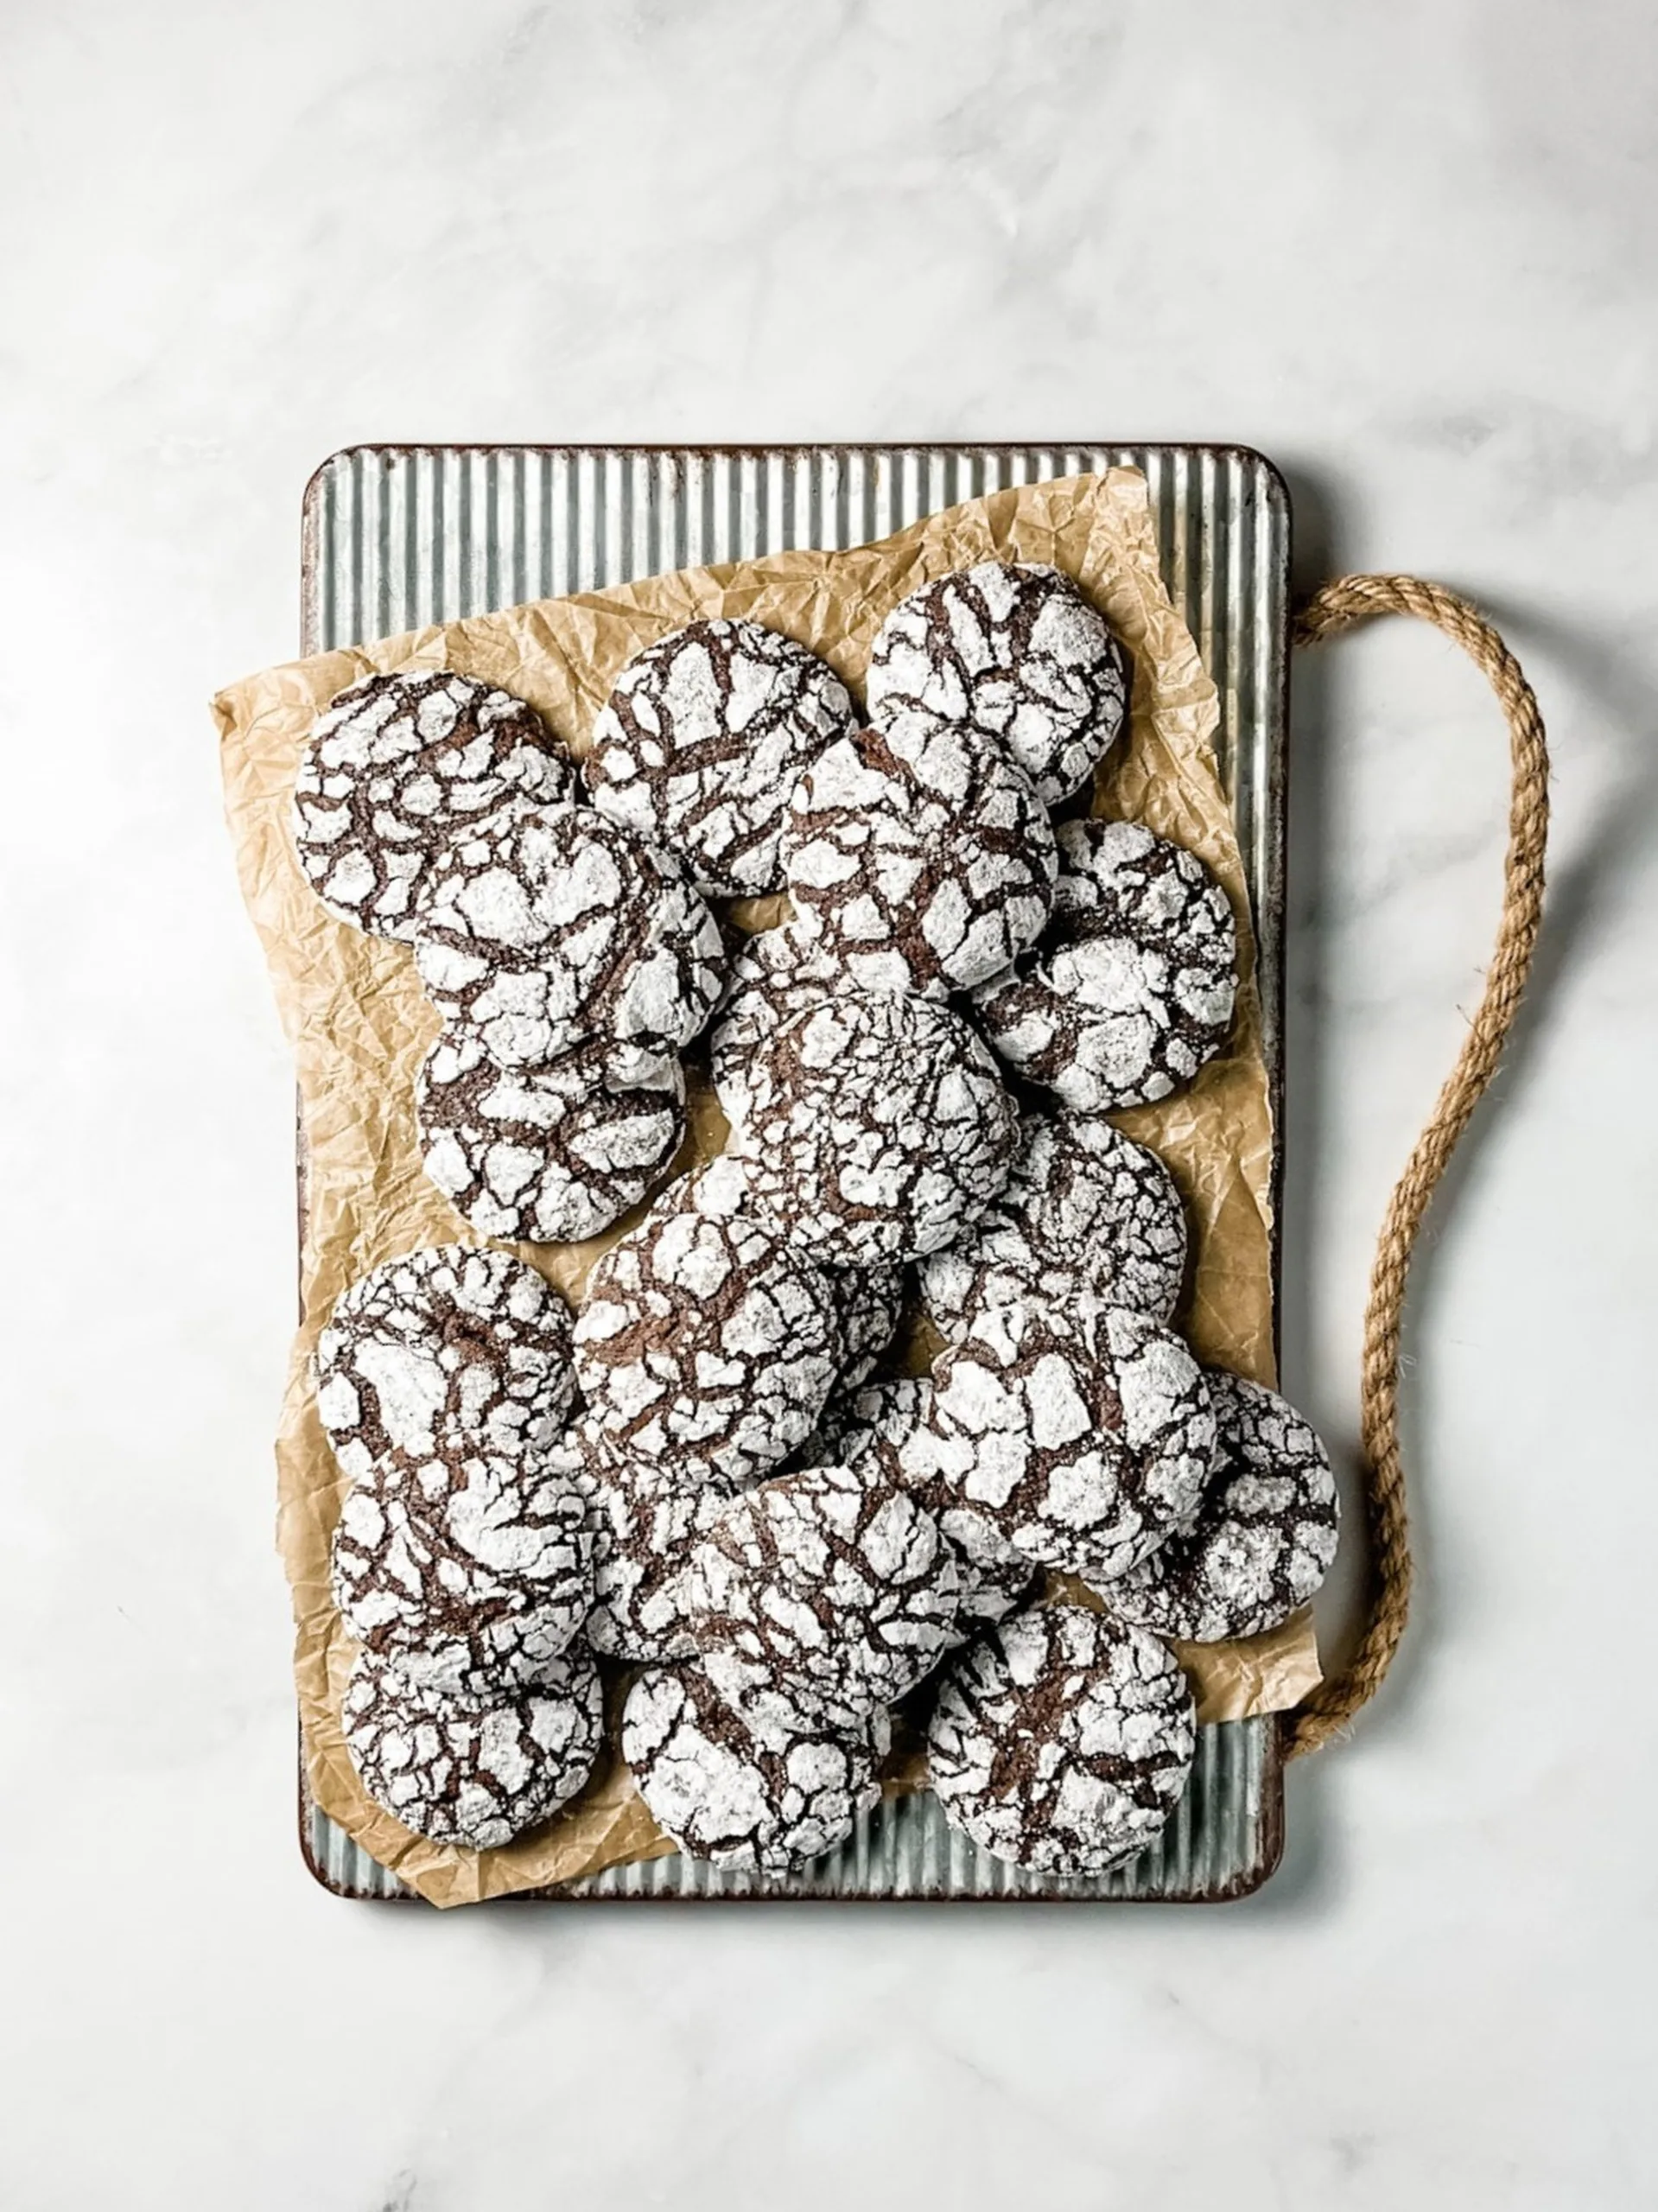 Chocolate Crinkle Cookies with Cake Mix